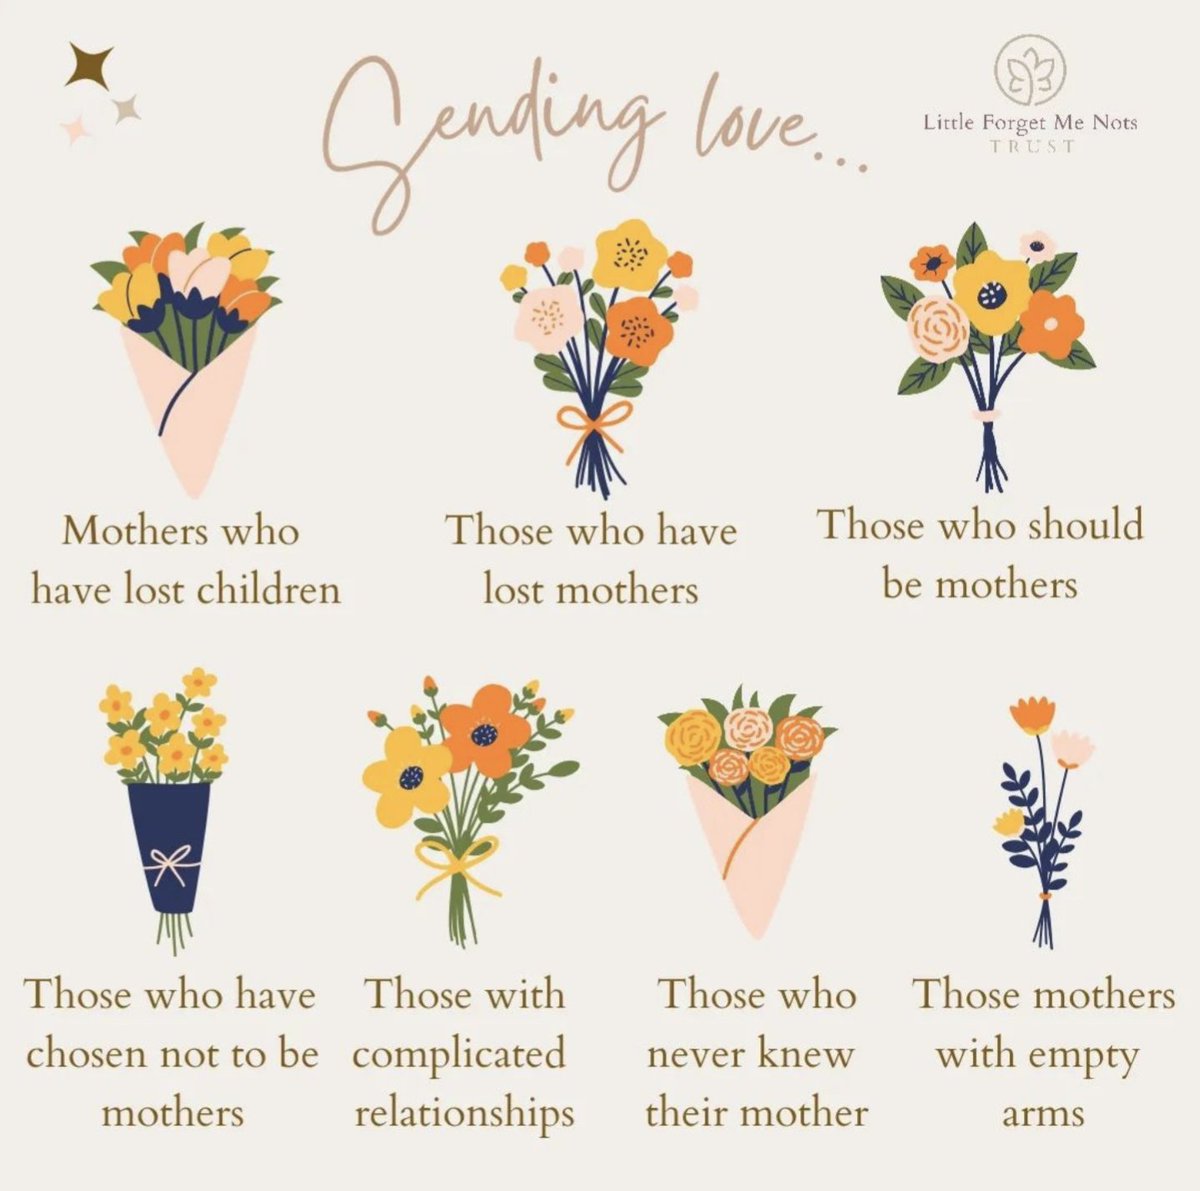 Sending so much love, strength and support to you all as we navigate the next few days. 

#stillamum #mothersday #miscarriage #infantloss #babyloss #stillborn #stillbirth #babylosssupport #tfmr